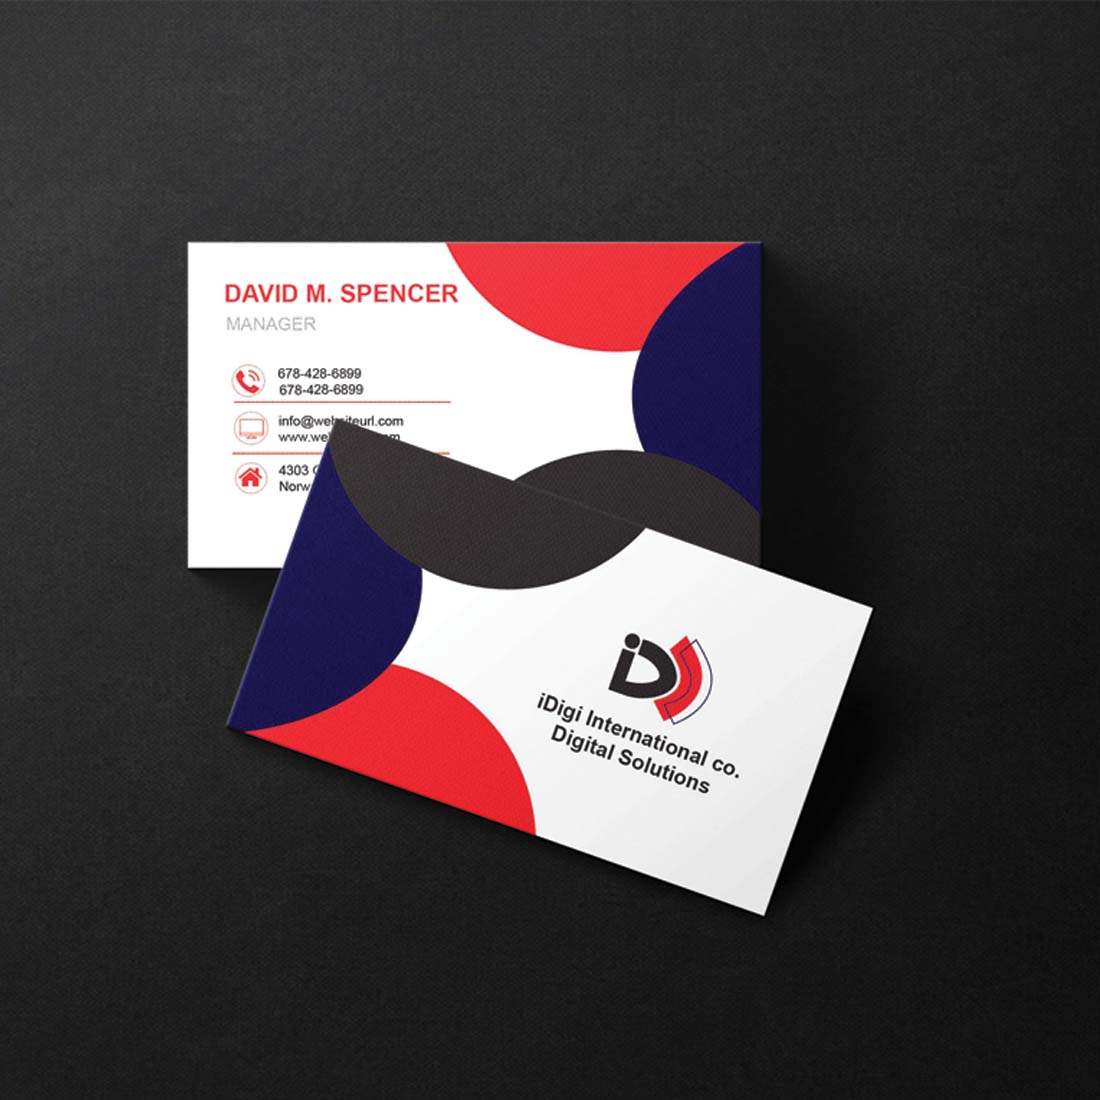 Red Creative Business Card Template front and back preview.